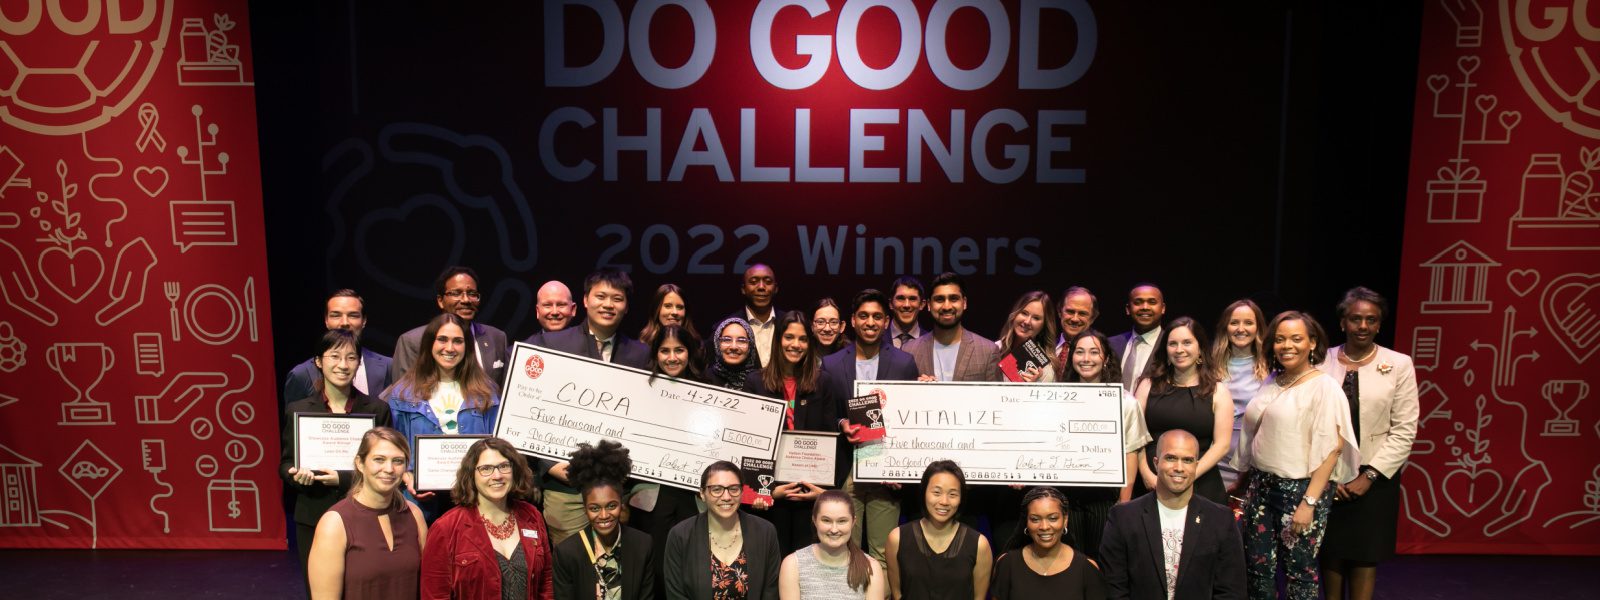 Group of Do Good Institute Challenge participants stand togther on a stage